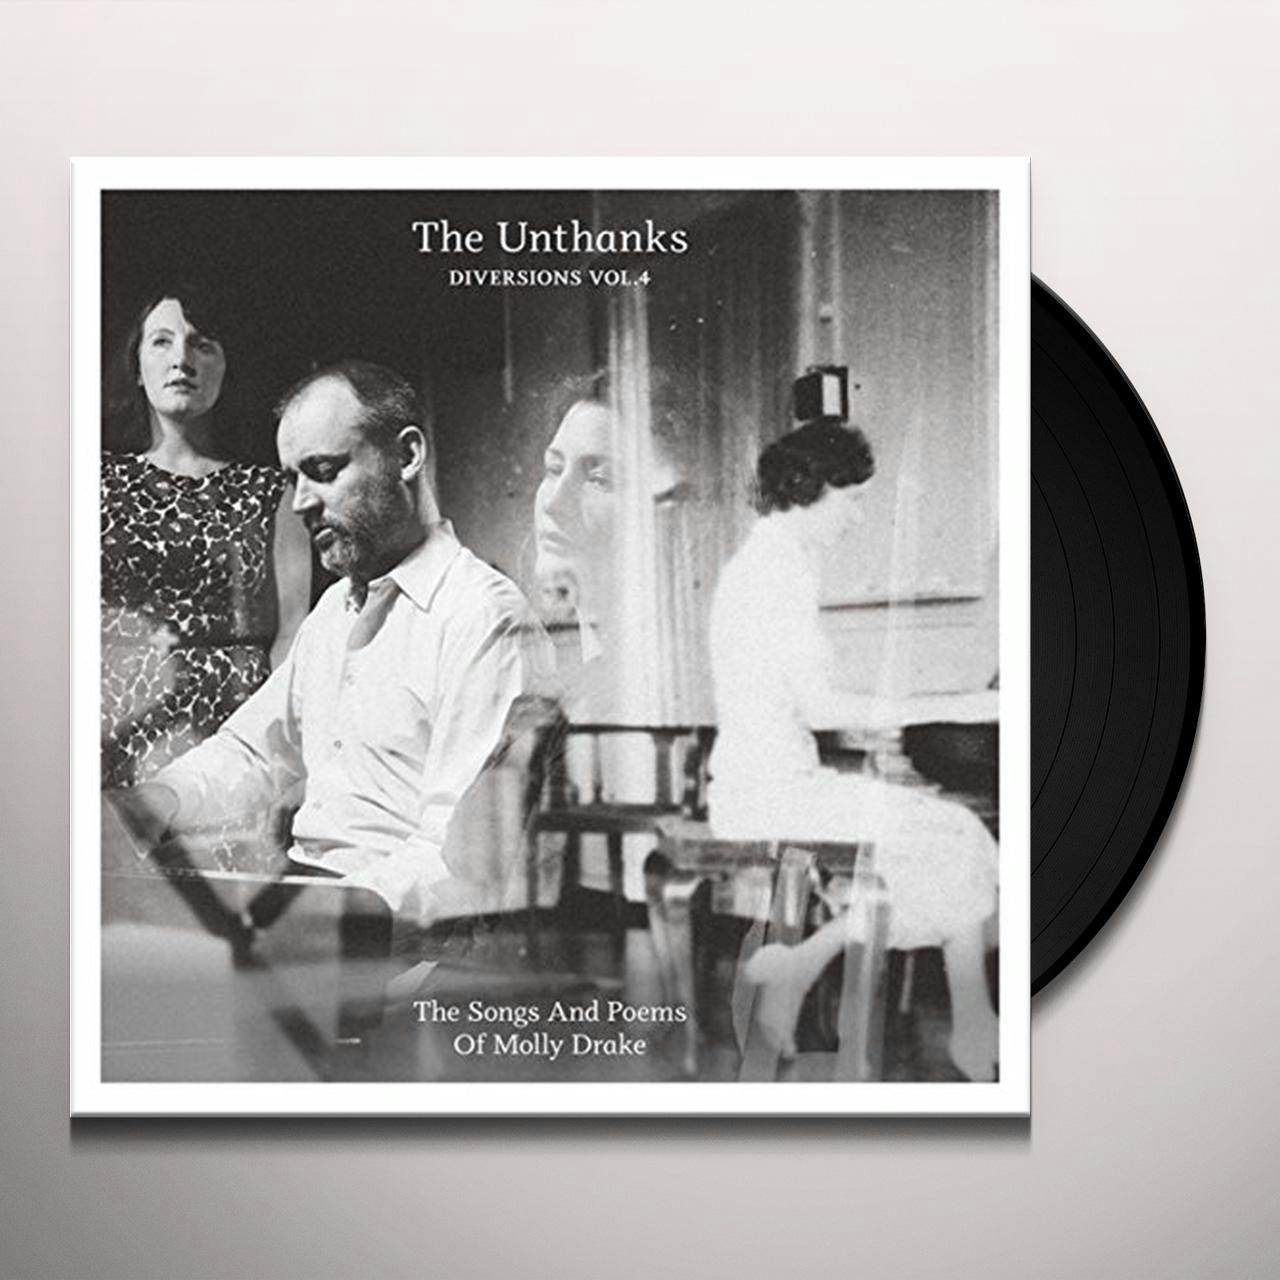 The Unthanks DIVERSIONS 4: SONGS AND POEMS OF MOLLY DRAKE Vinyl Record